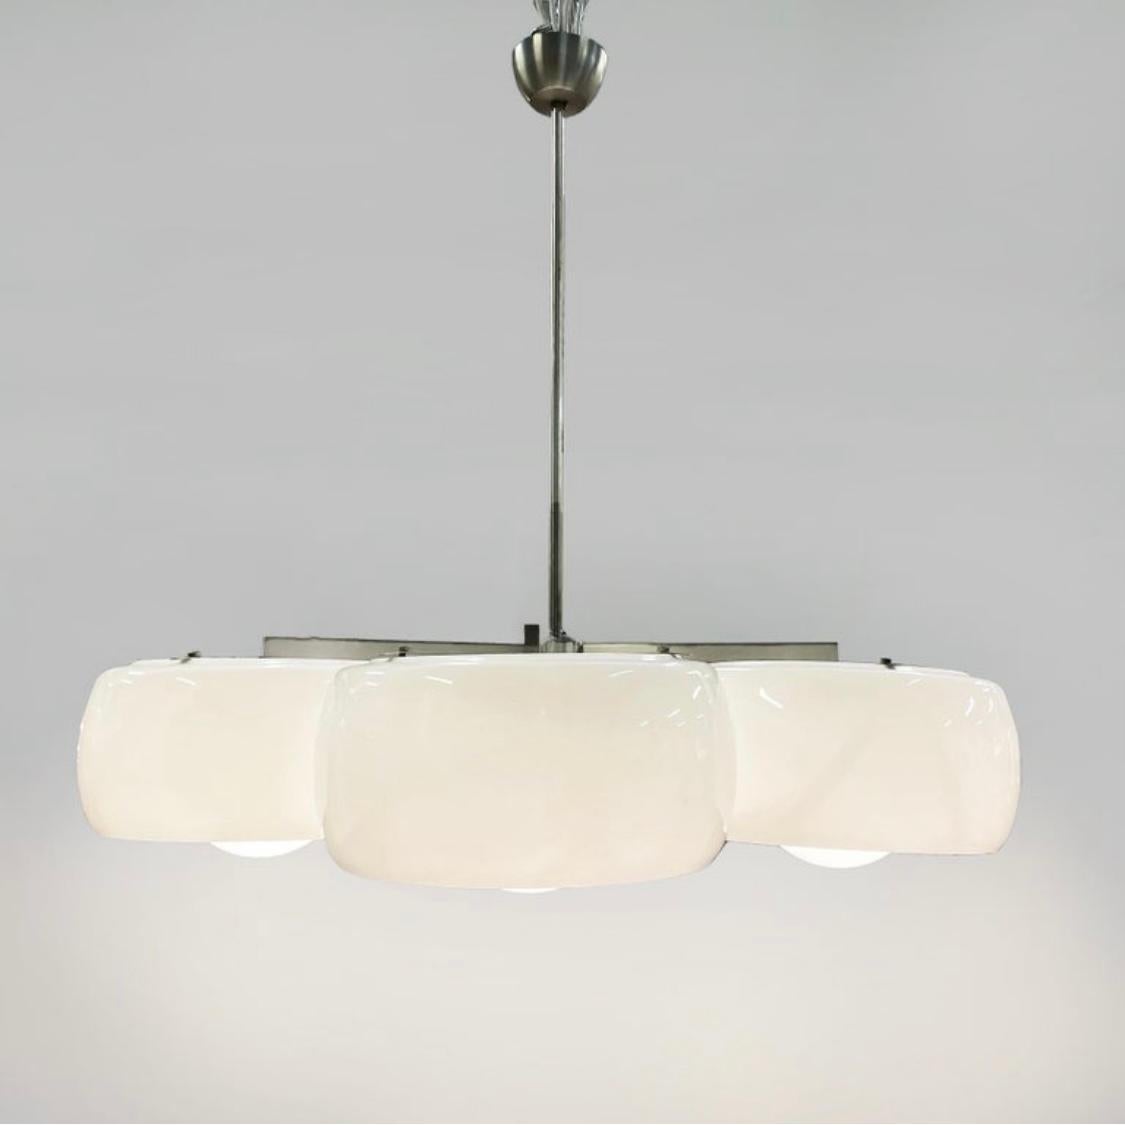 Italian mid-century Pentaclinio chandelier by Magistretti for Artemide, 1970s
Its a very rare ceiling lamp and its not so simple to find in this perfect conditions.
The glass of the ceiling is the original produced in Murano Italy.
Artemide